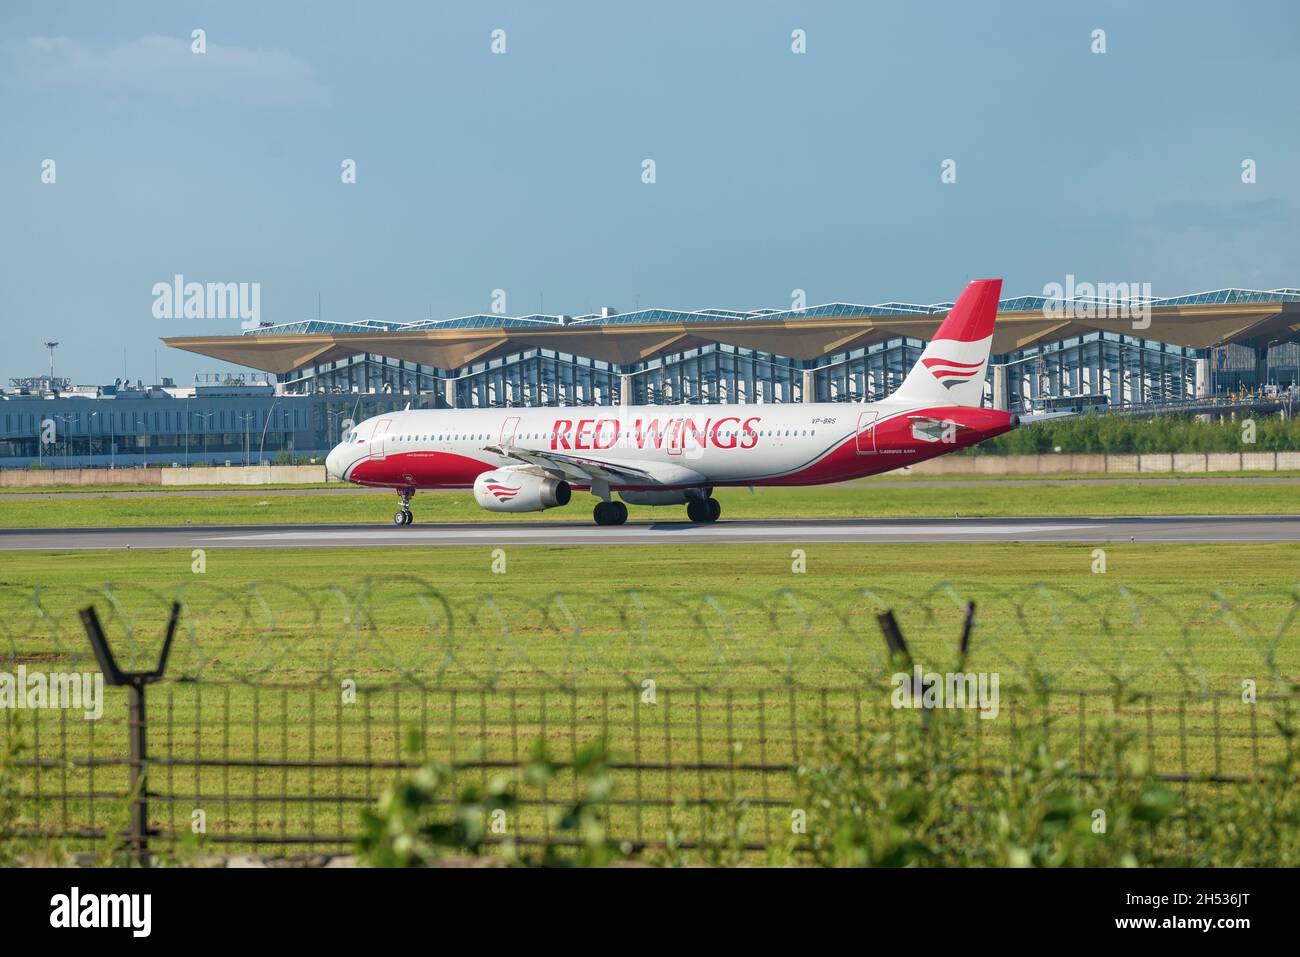 SAINT PETERSBURG, RUSSIA - AUGUST 08, 2020: Airbus A321-200 (VP-BRS) of Red Wings airlines on the runway against the background of Pulkovo airport bui Stock Photo